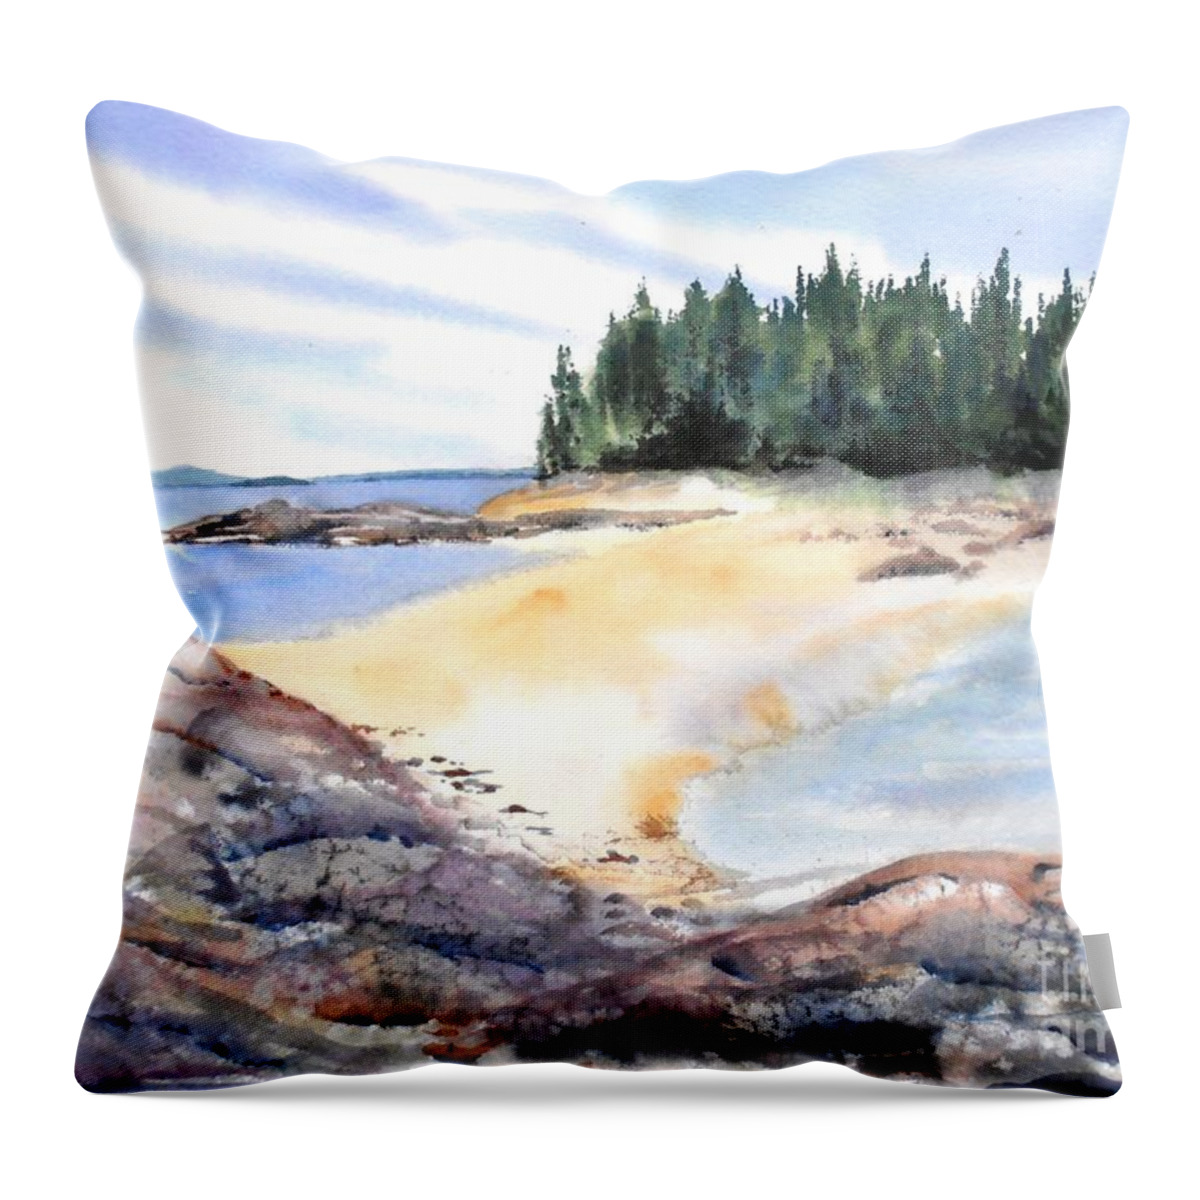 Maine Throw Pillow featuring the painting Barred Island Sandbar by Diane Kirk